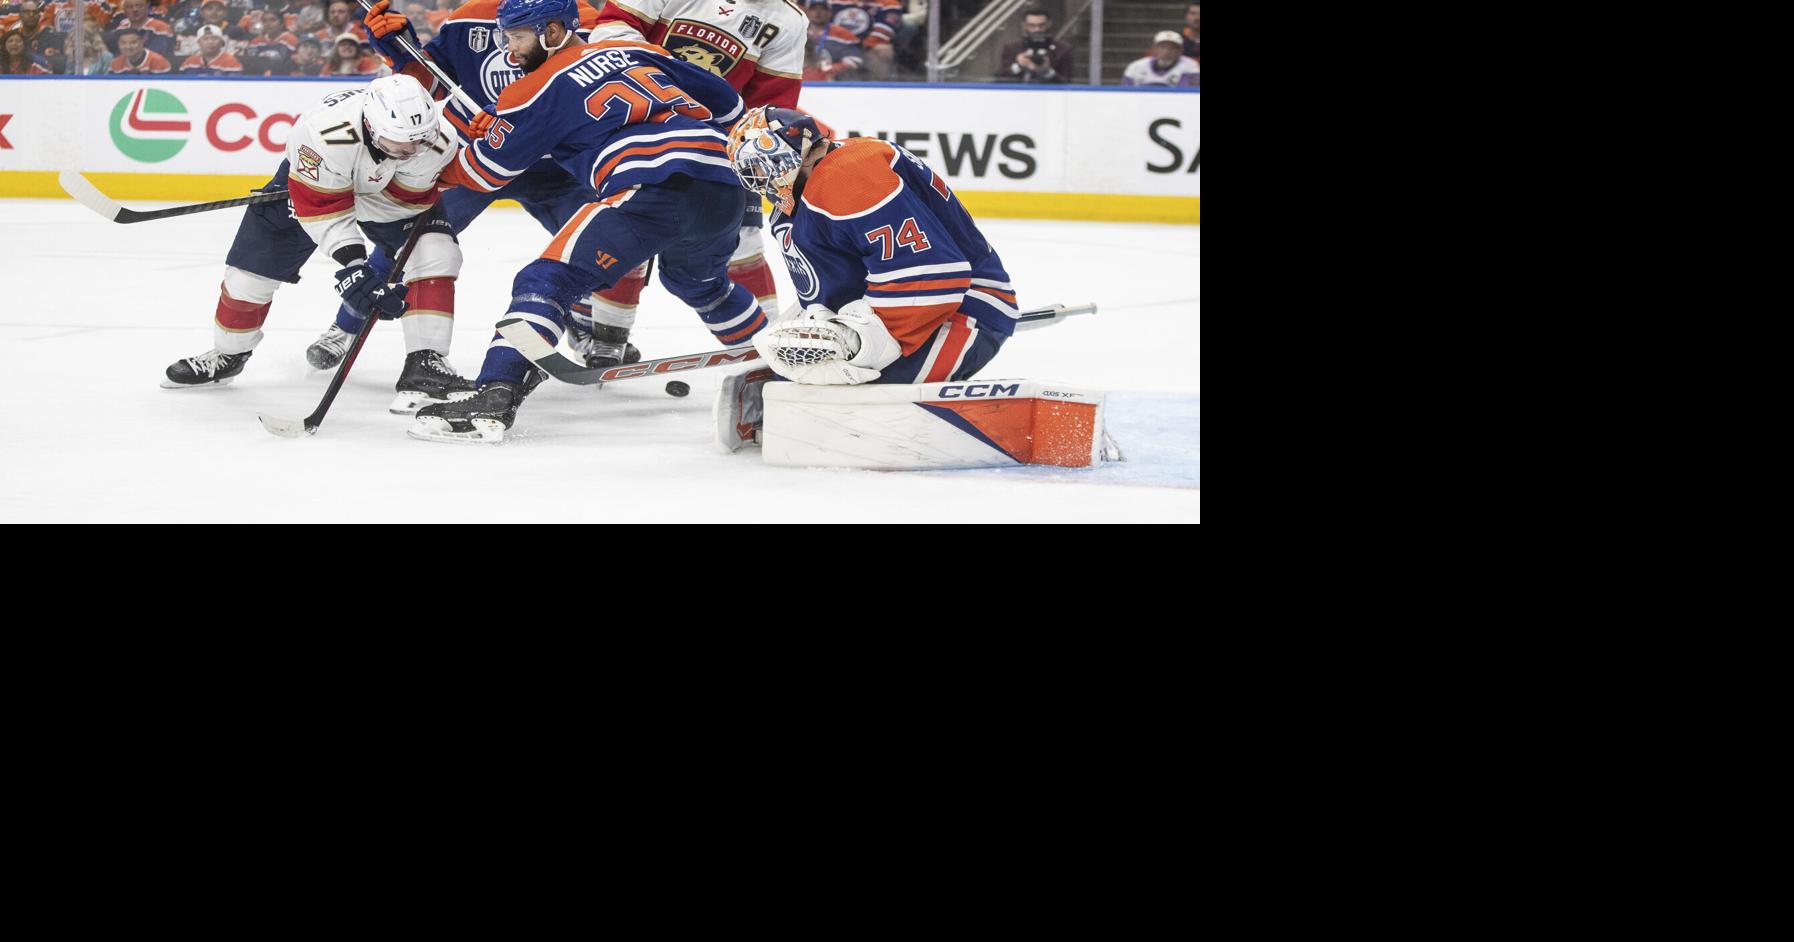 Oilers' penalty kill has made a major difference in the Stanley Cup Final against the Panthers